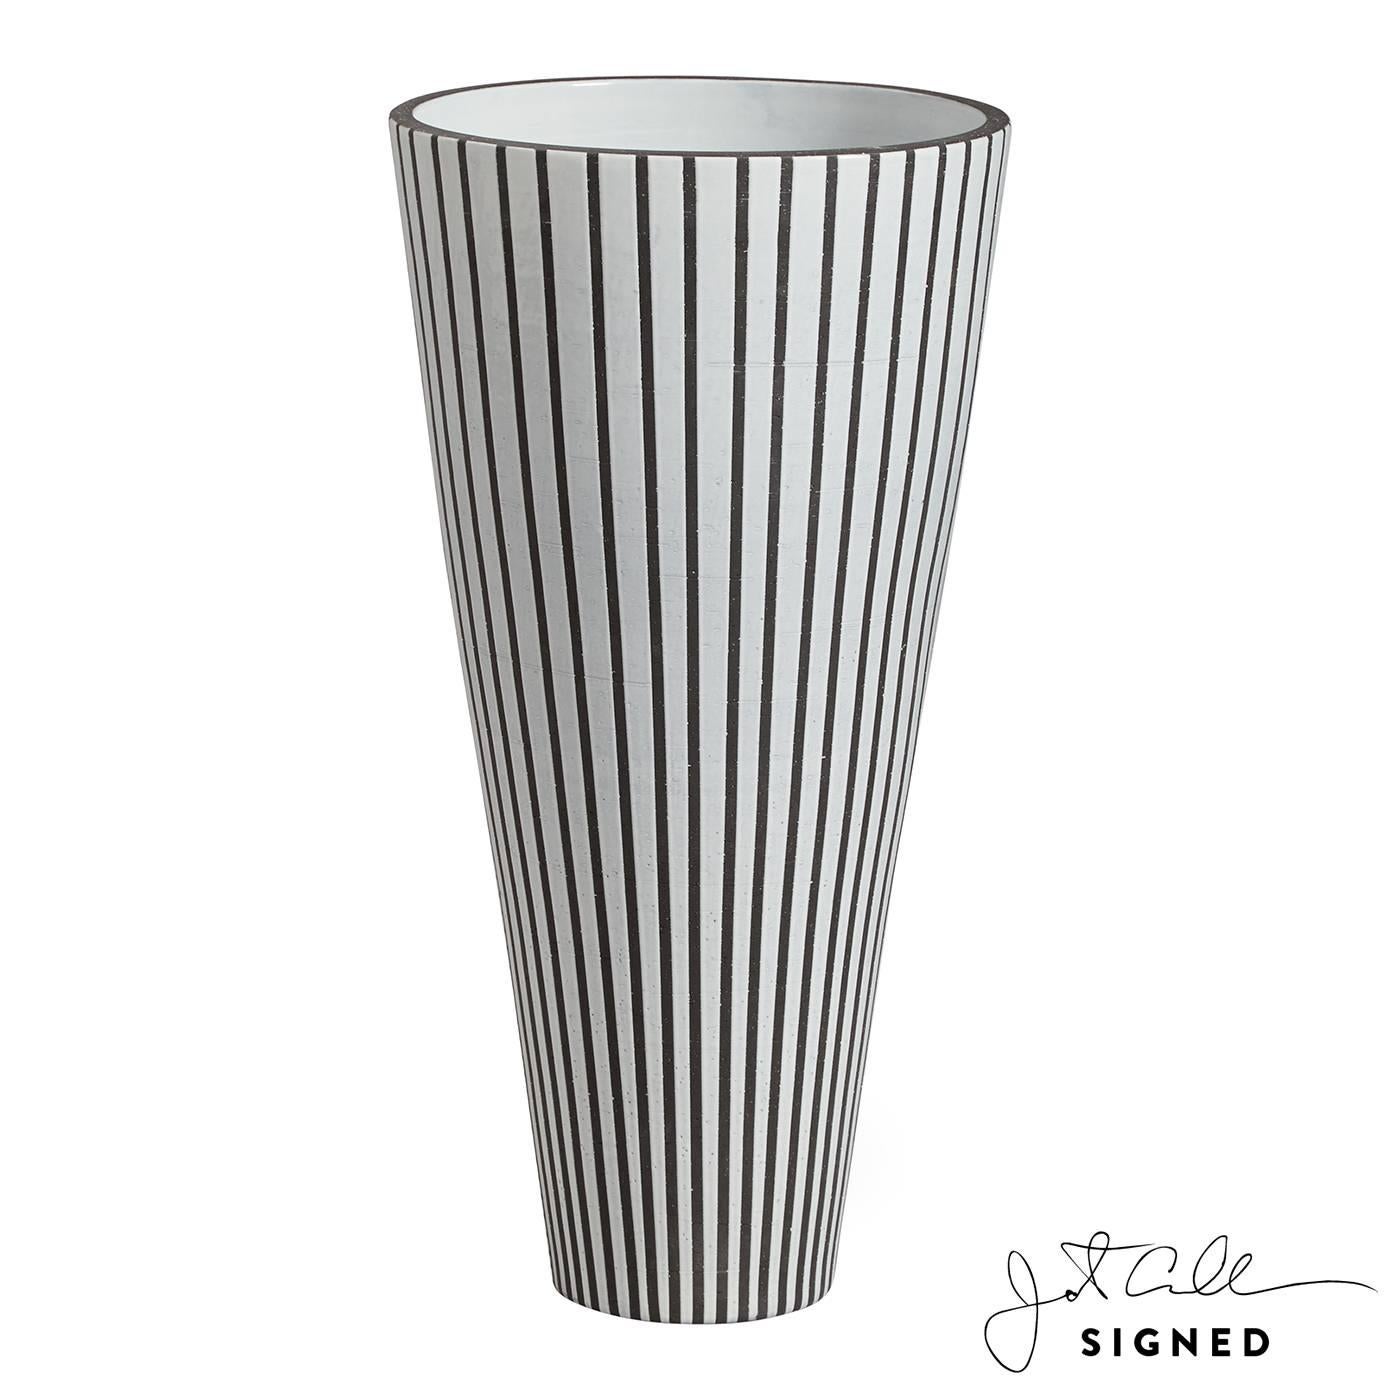 Couture craft. Joining our Palm Springs collection: very limited-editions, hand-thrown by skilled artisans in our Peruvian workshop. Our palm springs giant water tower vase is part of an exclusive series:

12 limited-edition designs
Only eight of